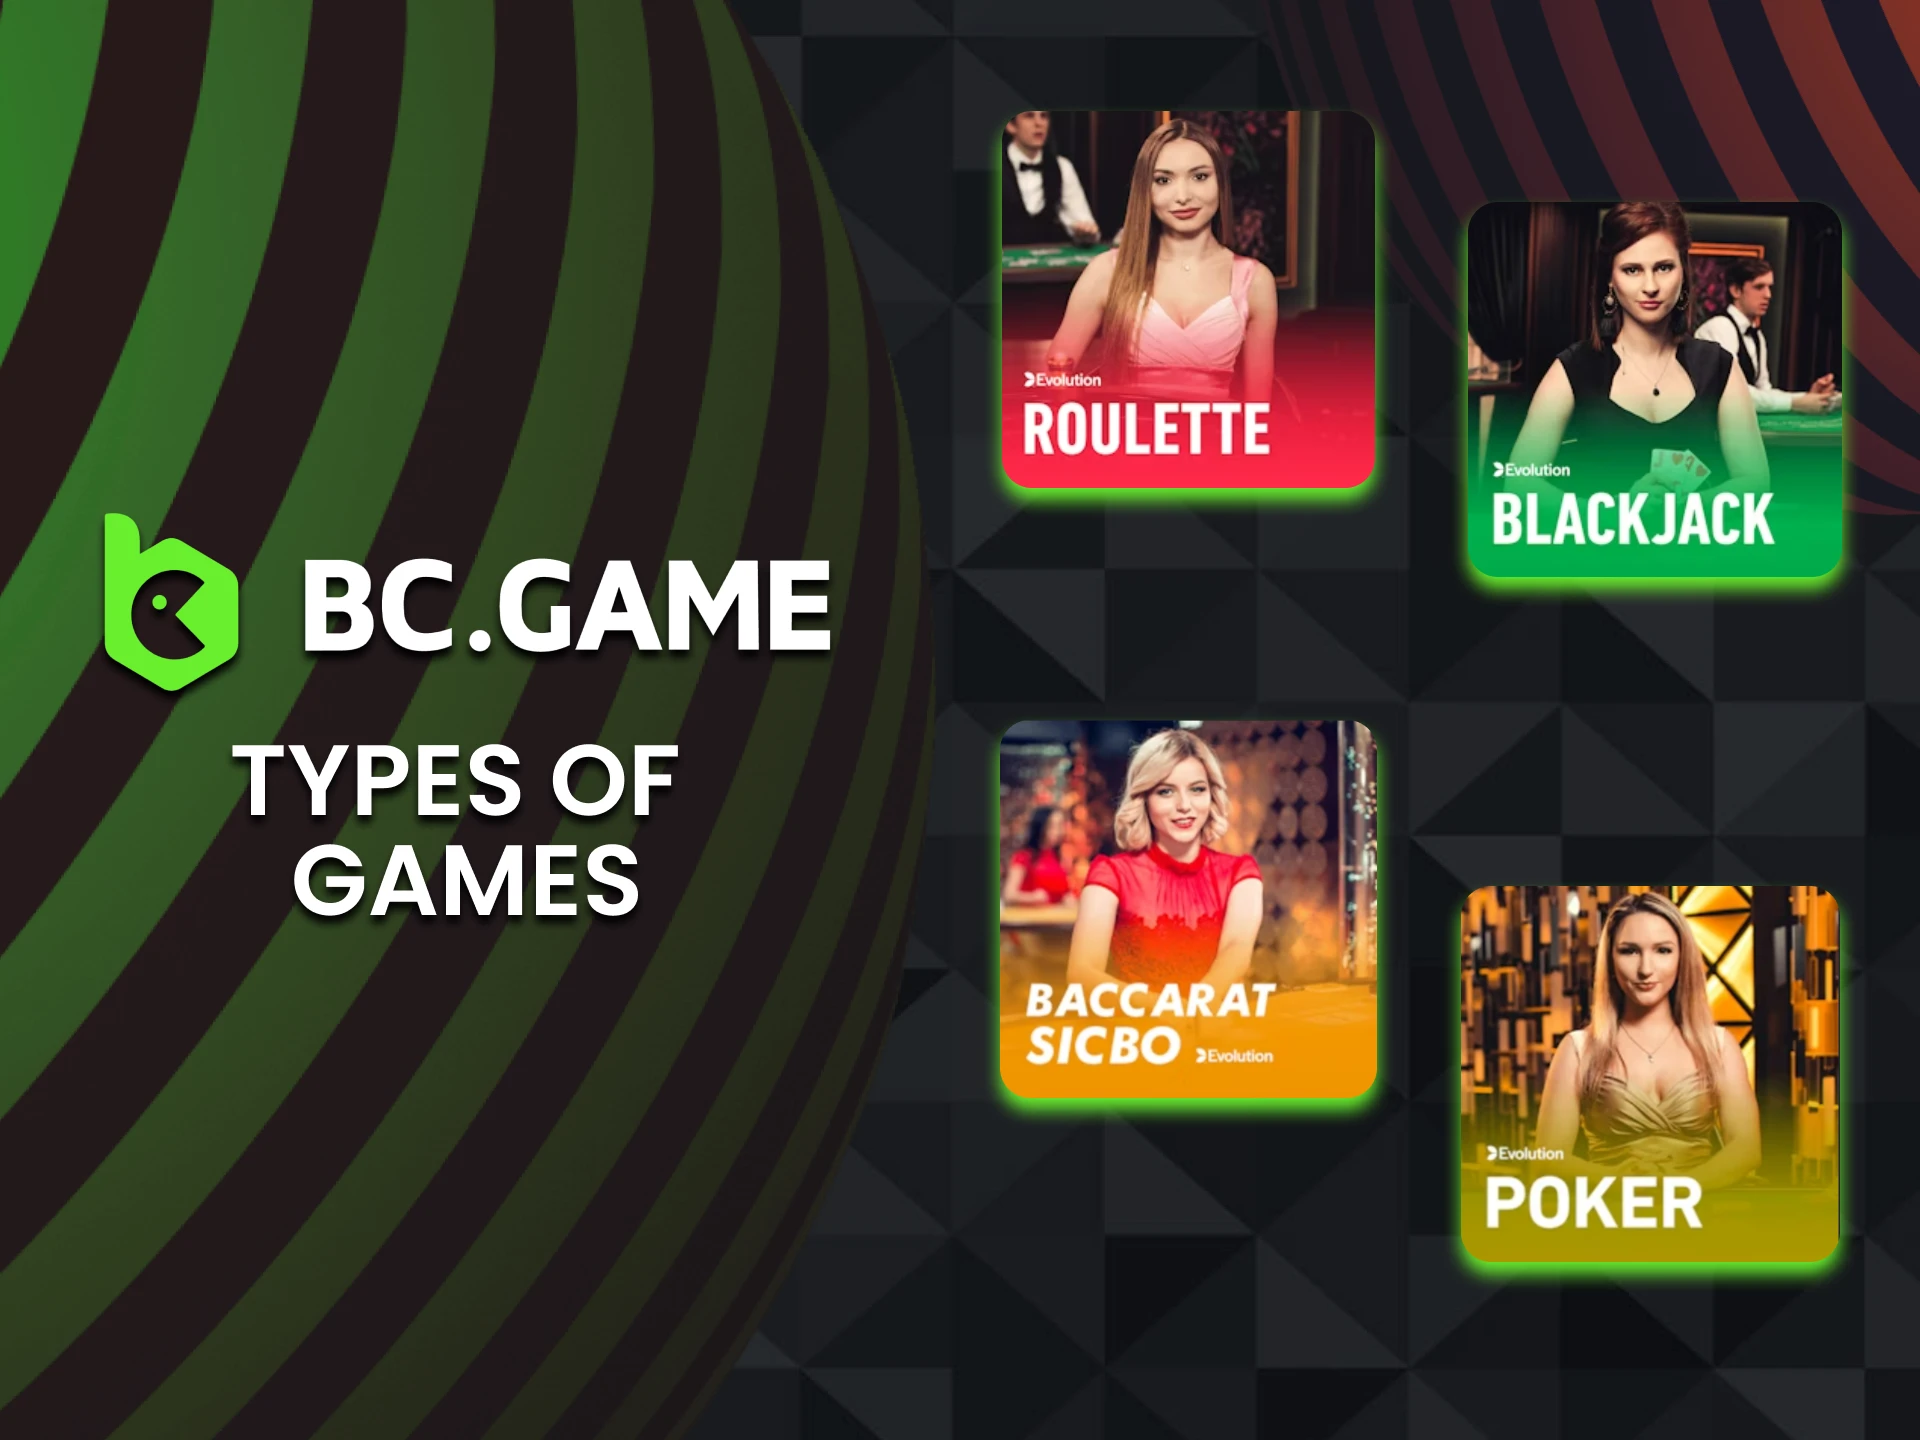 We will show you what games are available in the live casino at BC Game.